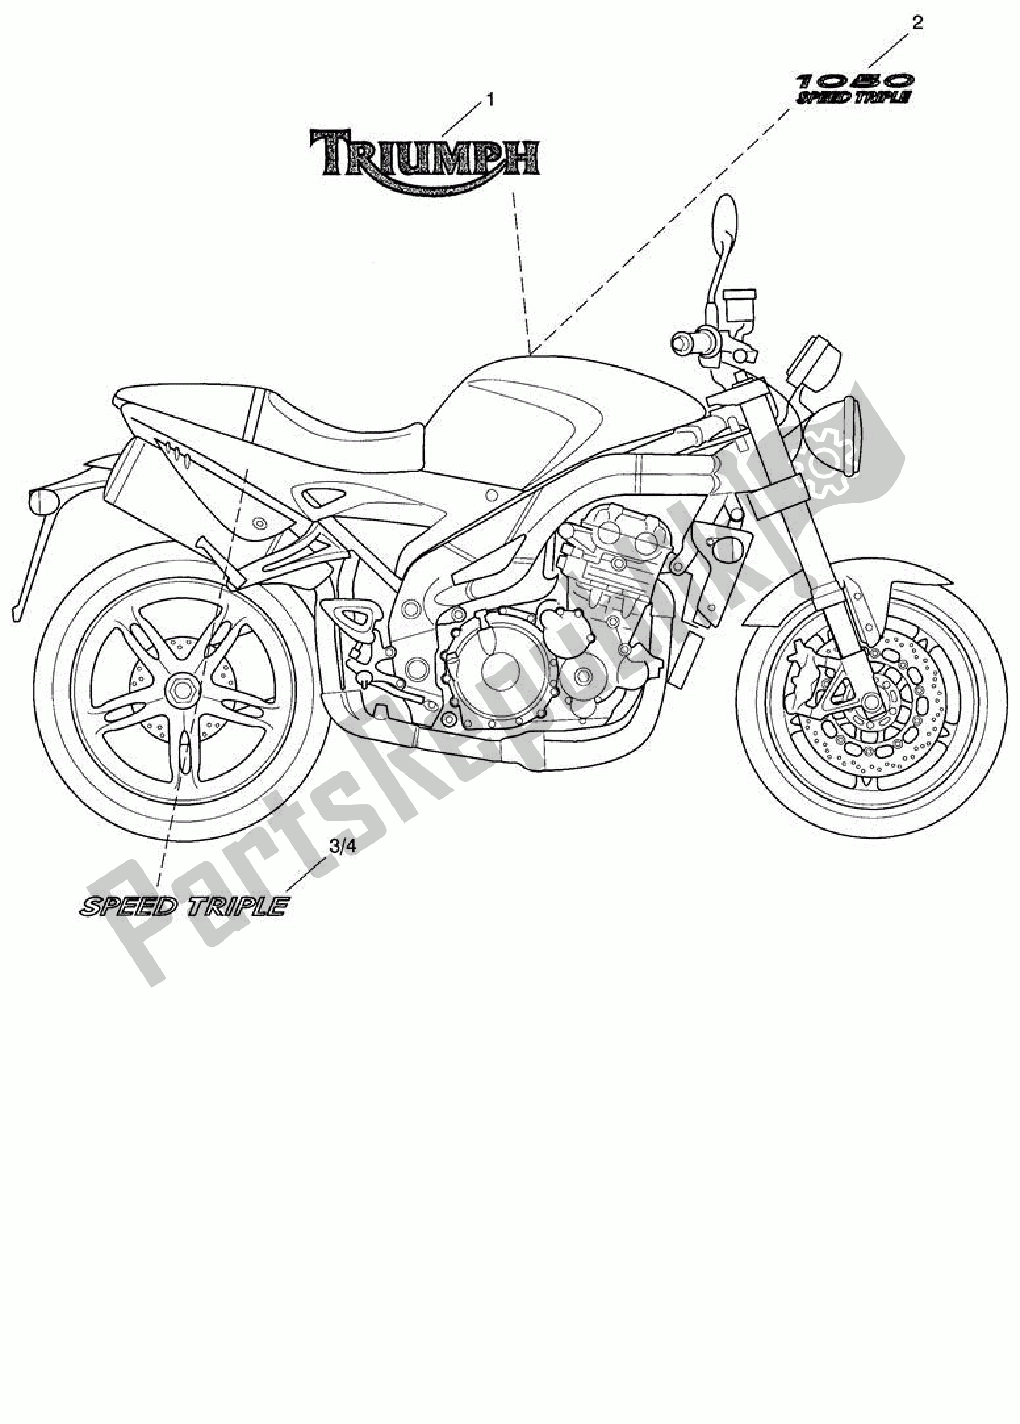 All parts for the Bodywork - Decals >333178 of the Triumph Speed Triple 1050 2008 - 2012